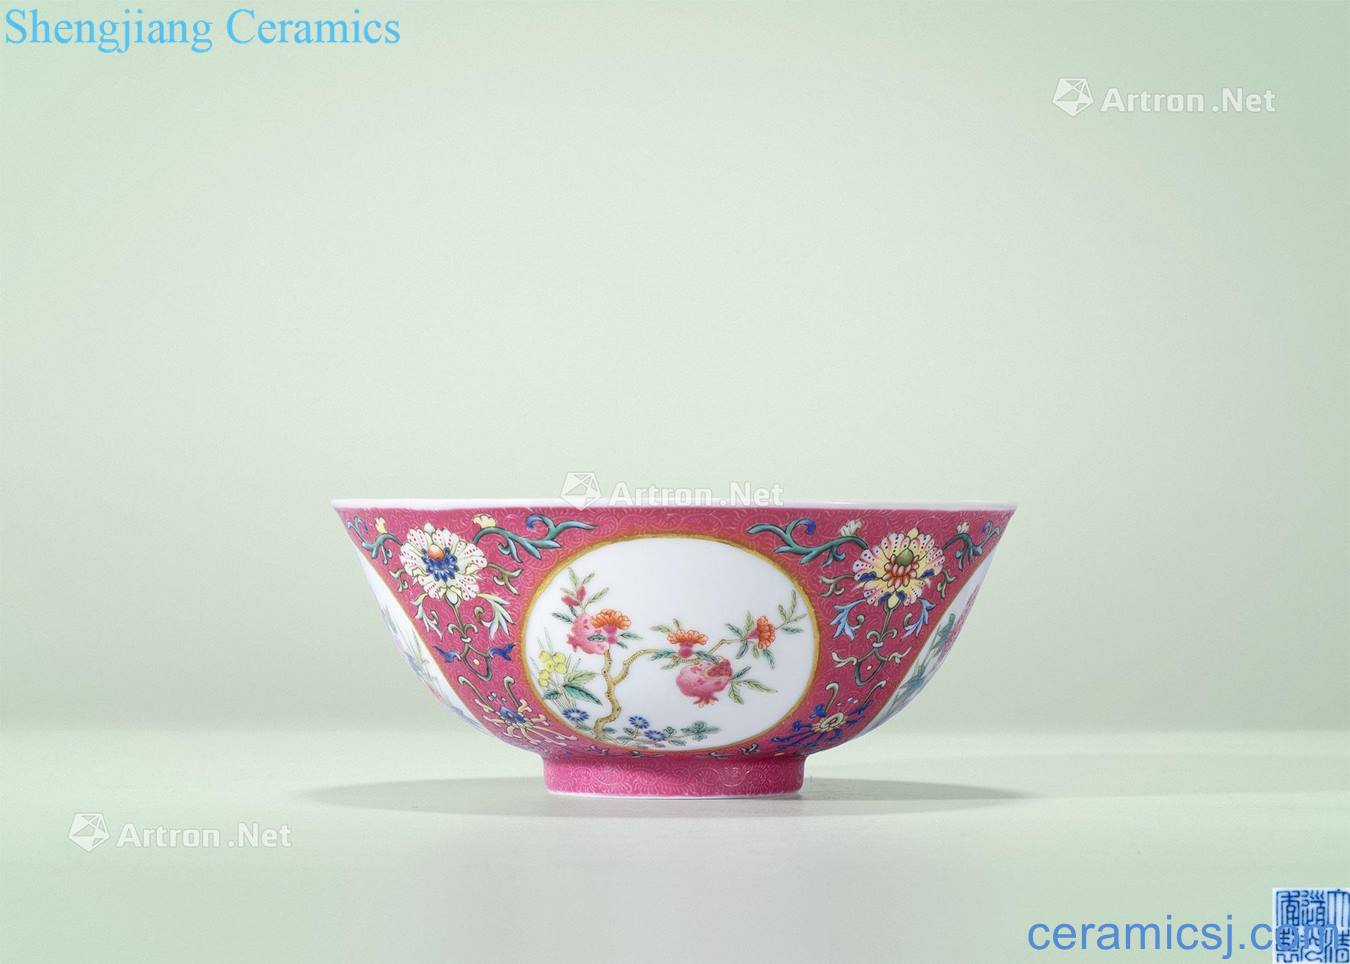 Qing daoguang carmine to color the rolling way far outside the four seasons flower fruit grain blue and white in the four seasons flower green-splashed bowls